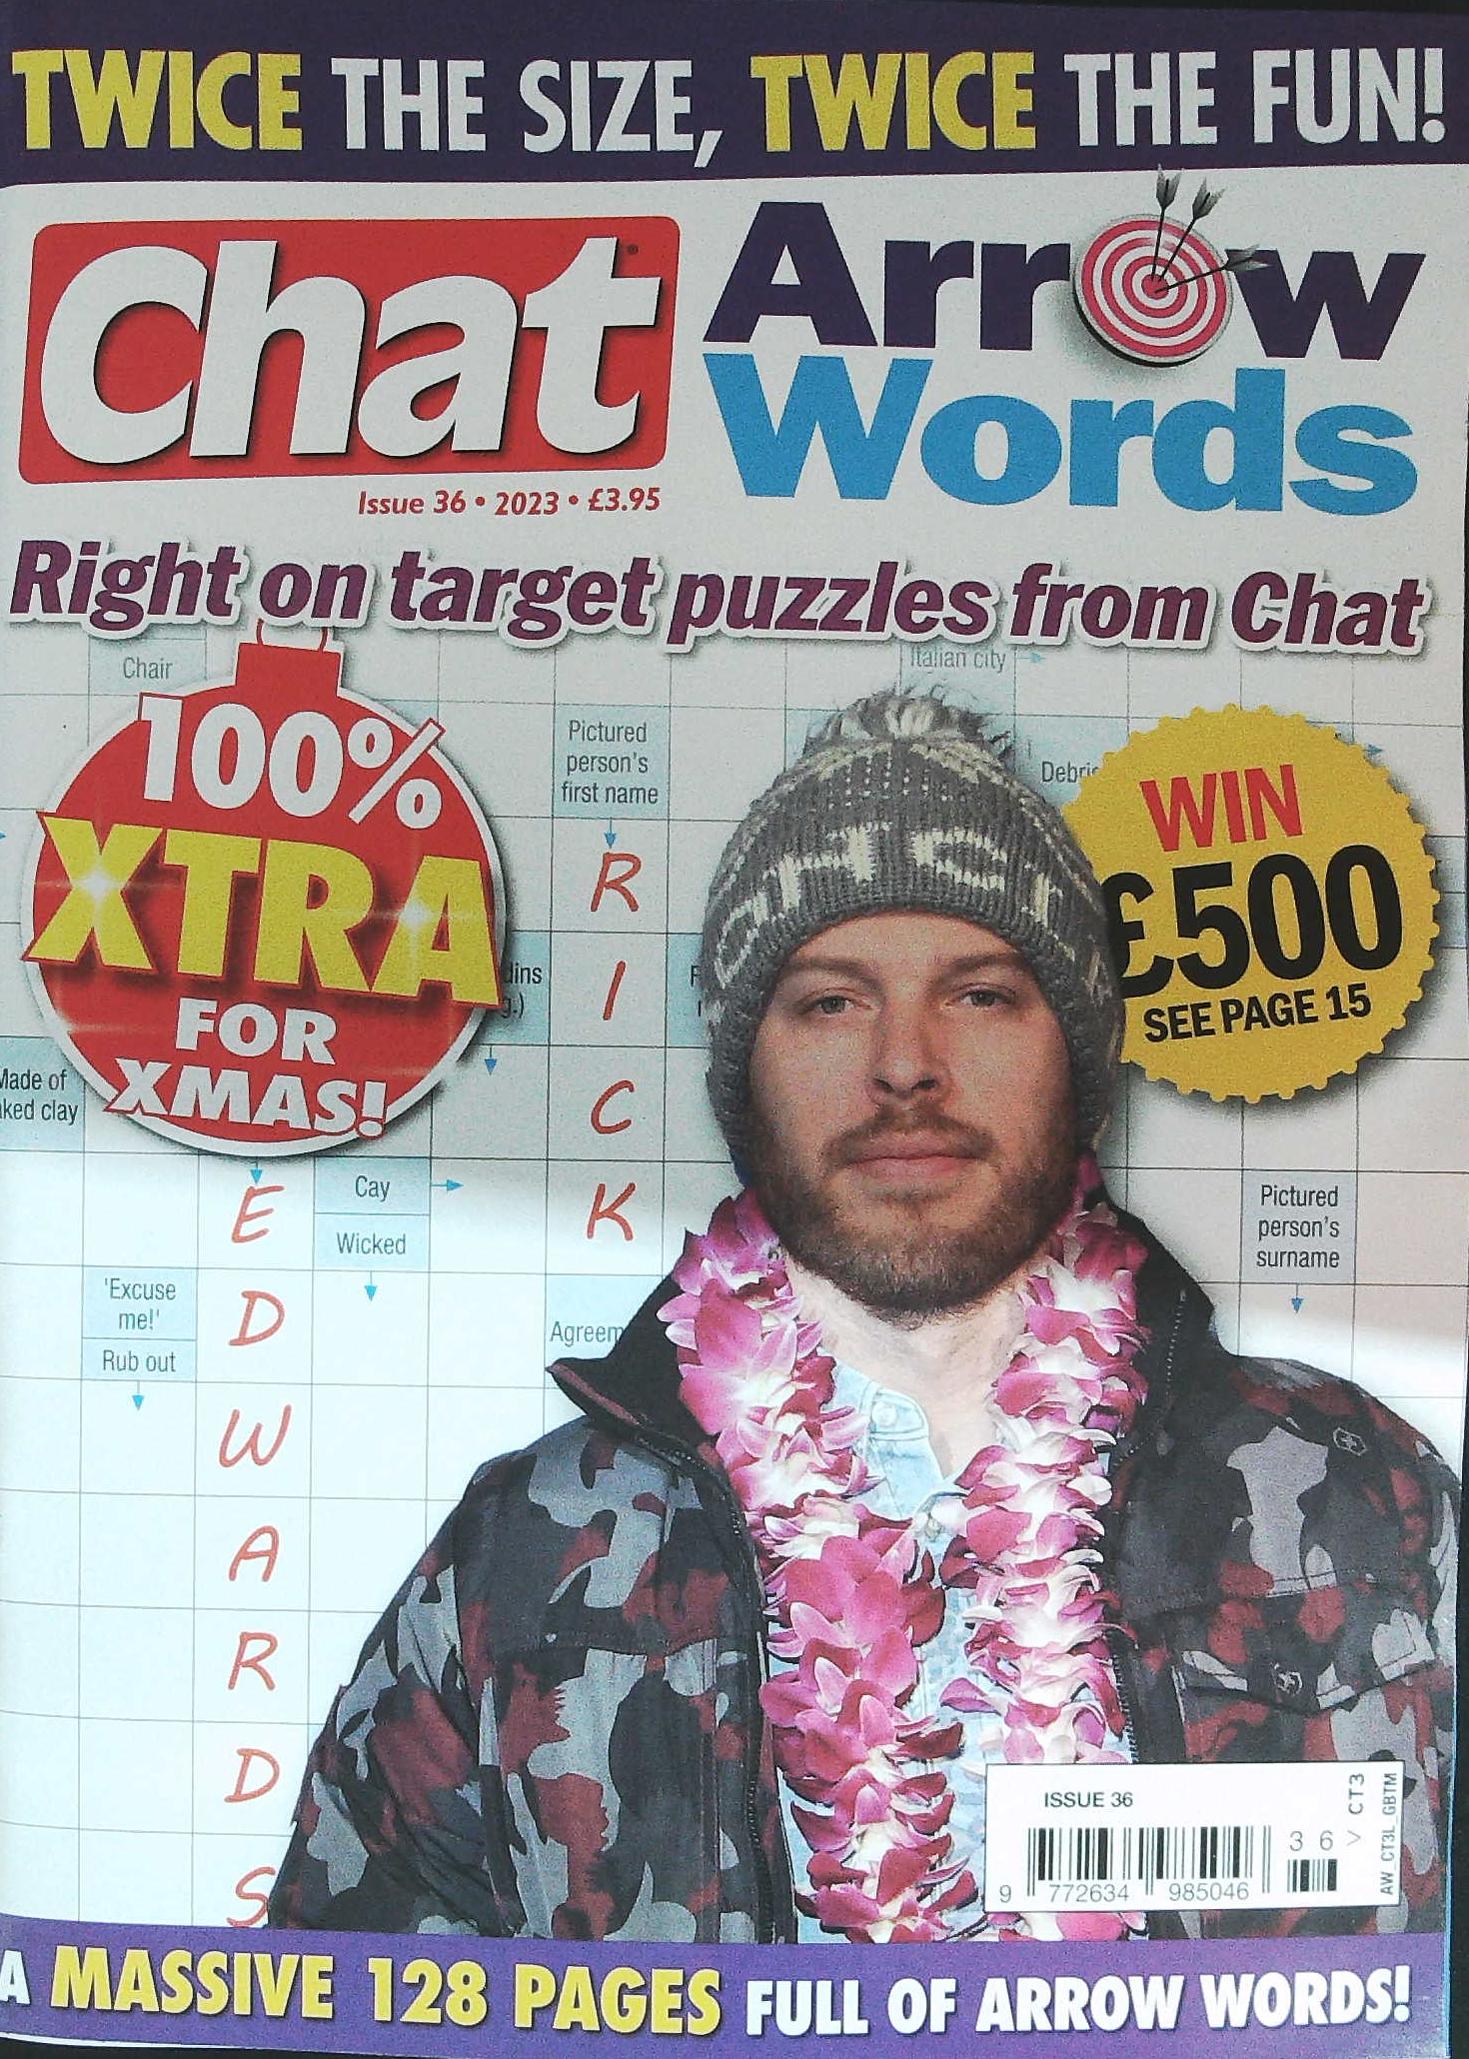 CHAT ARROW WORDS